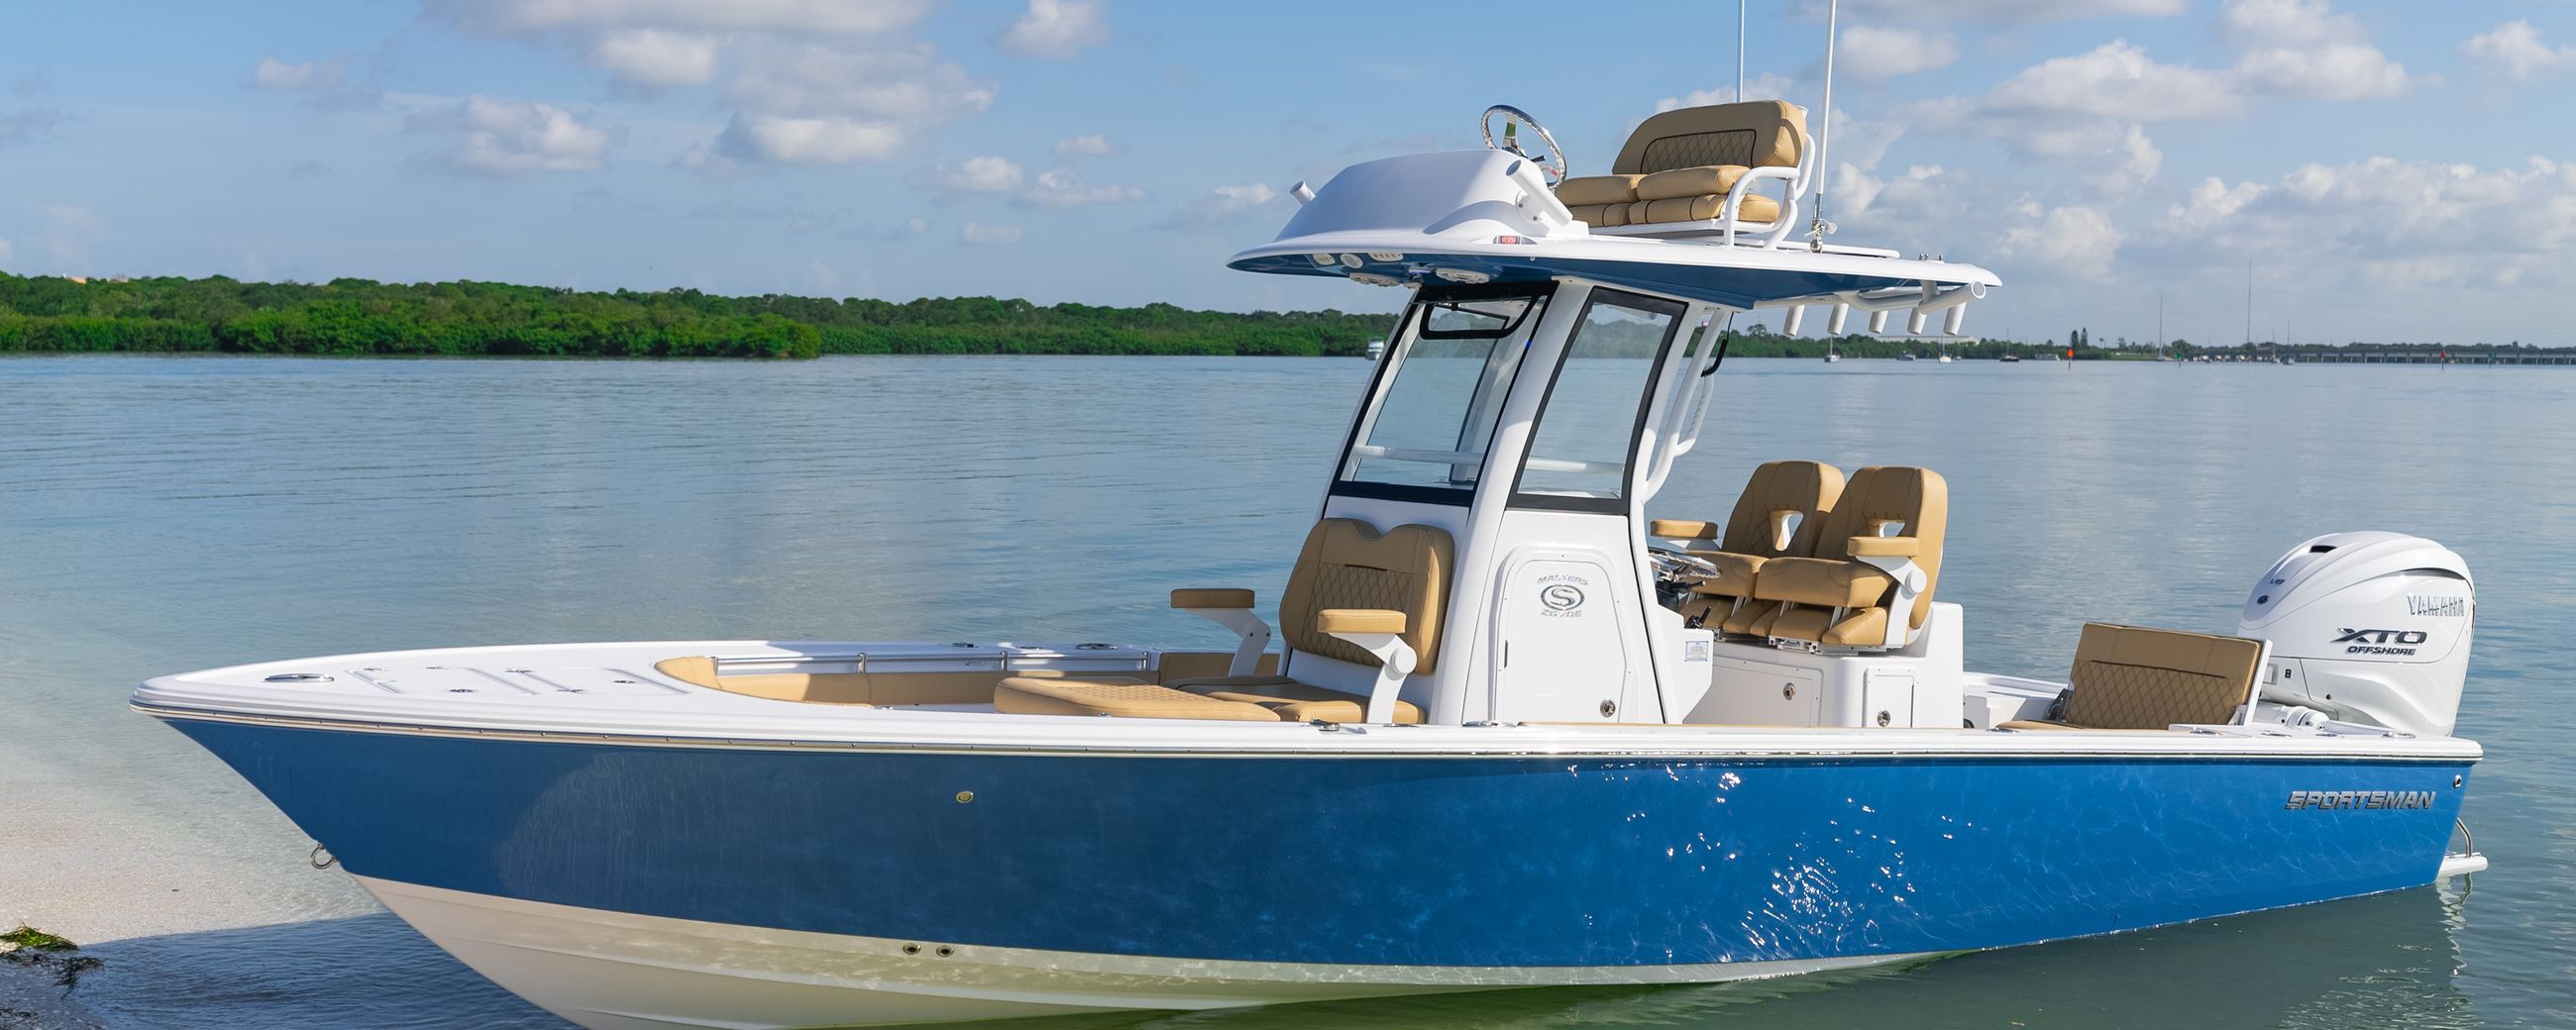 All of the technical specifications for the 267oe-bay-boat